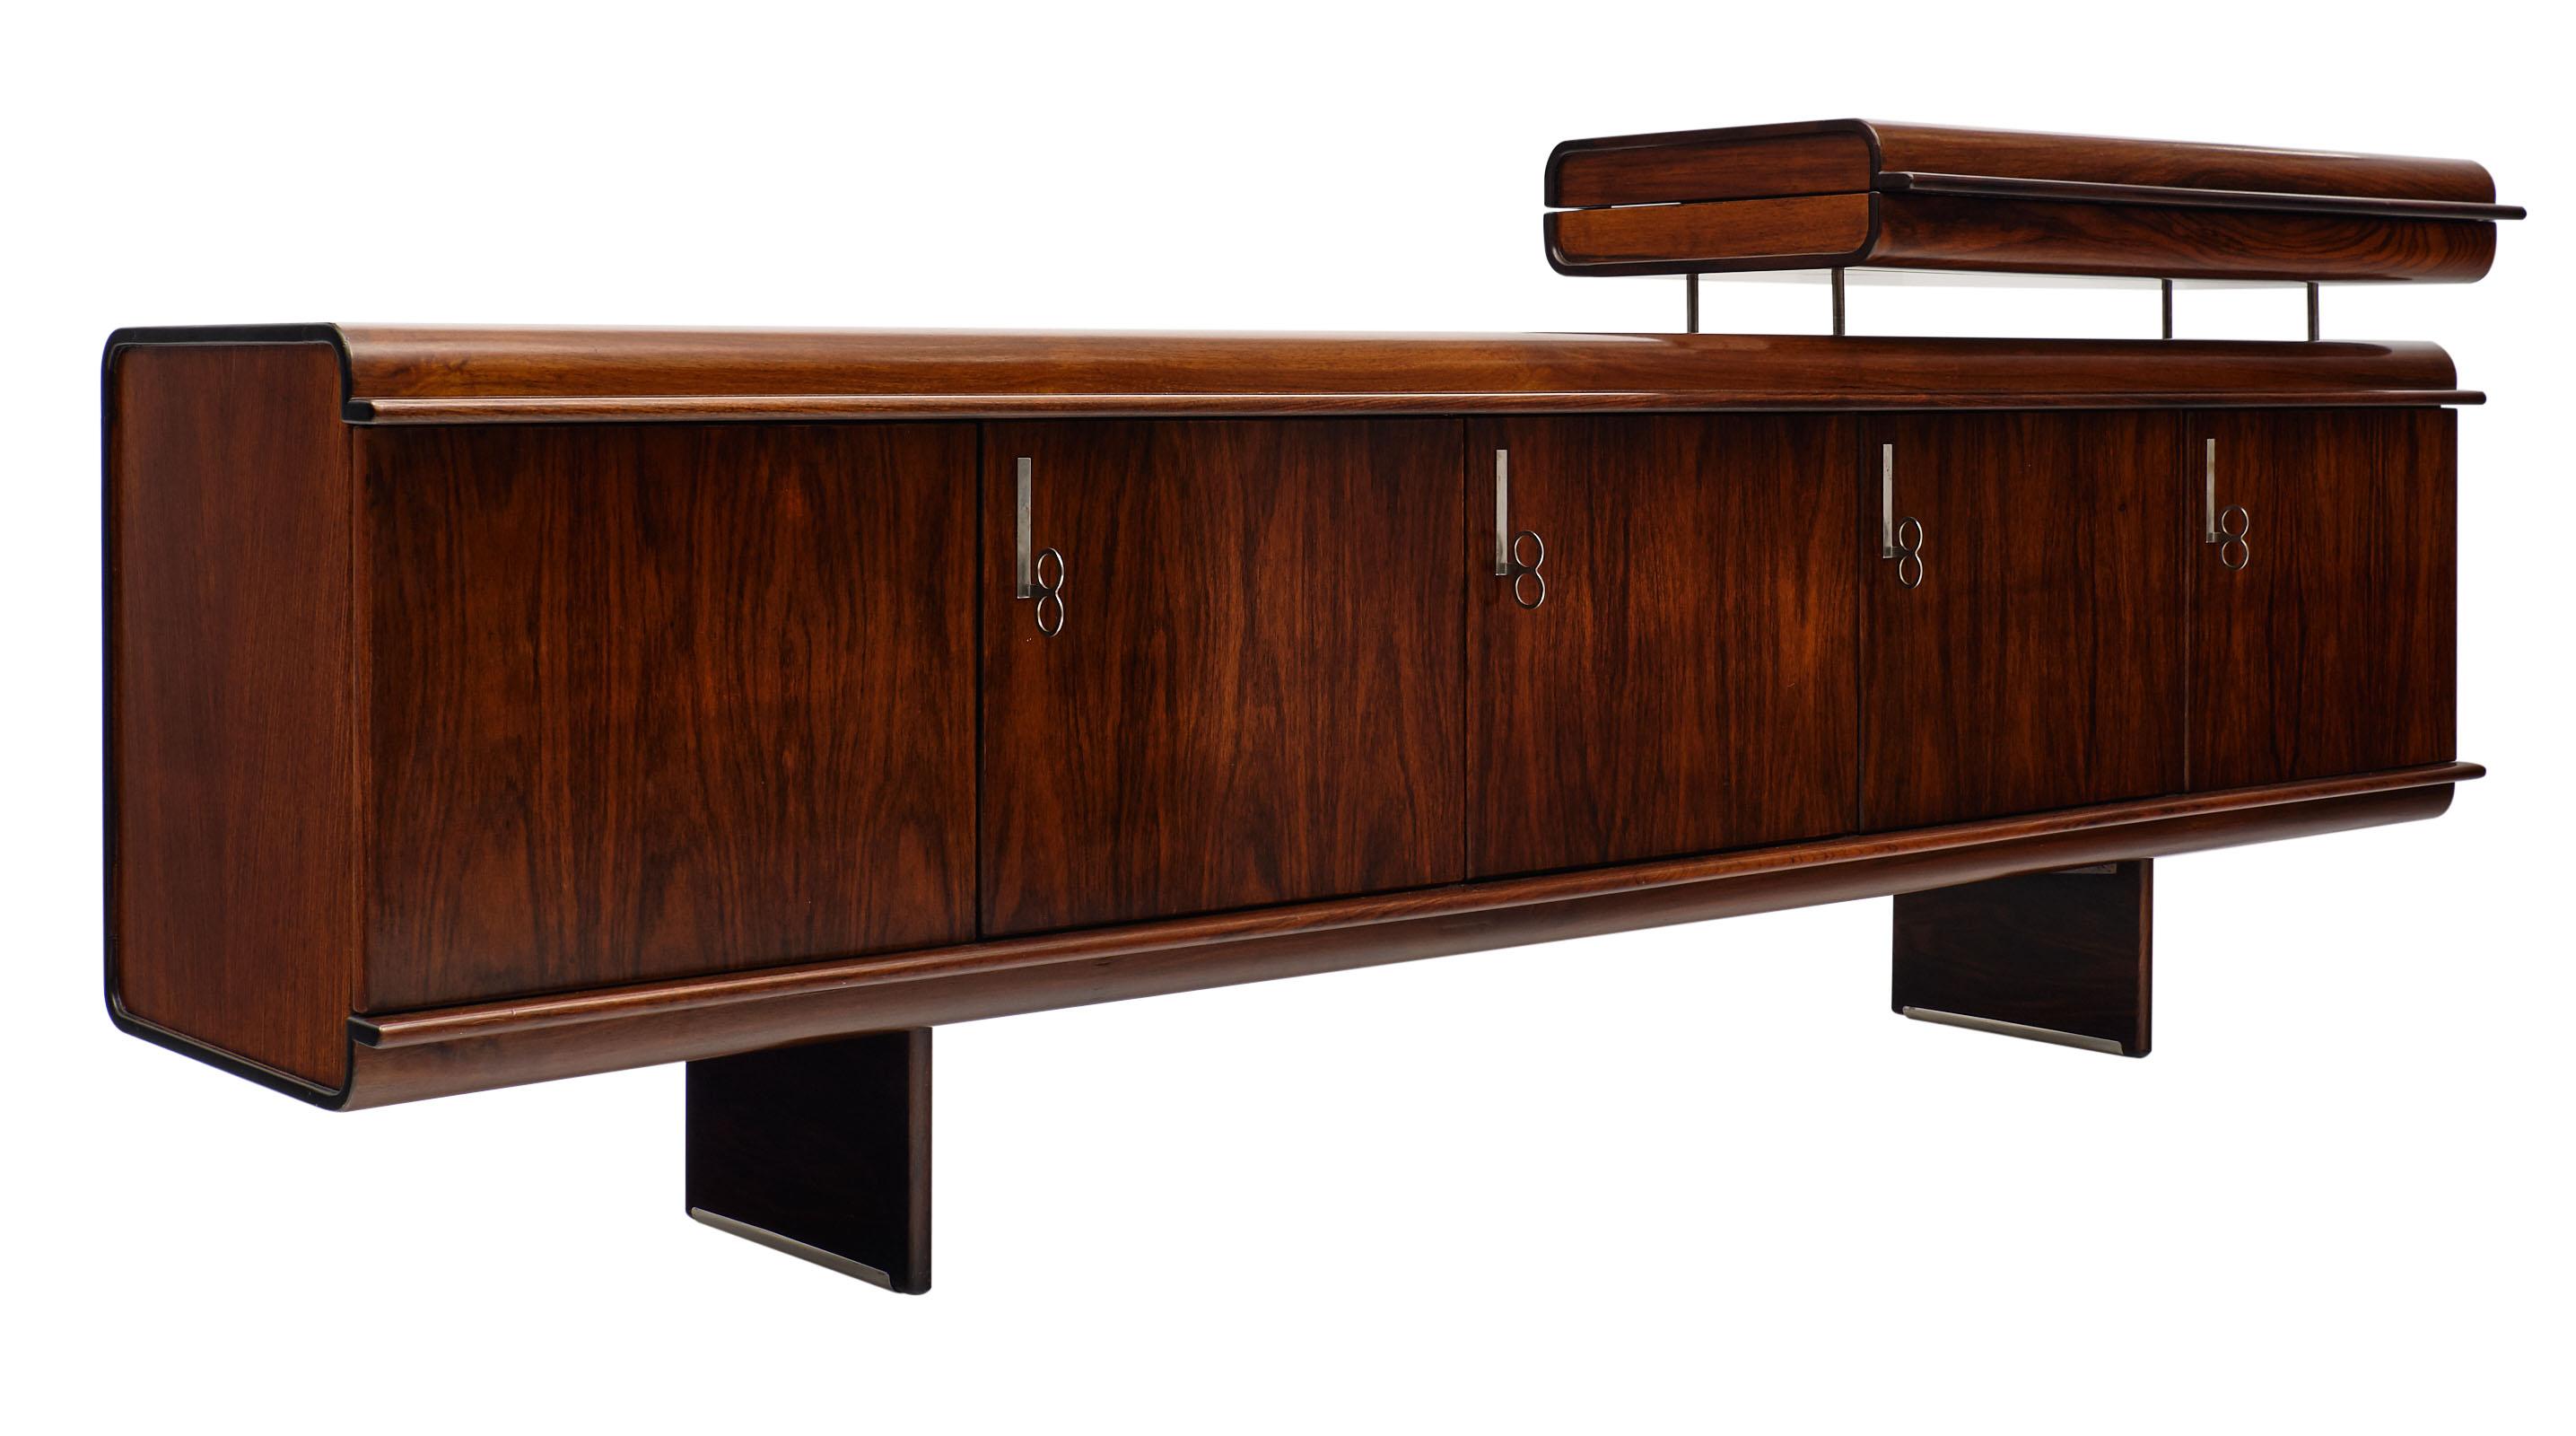 “Pellicano” buffet by Vittorio Introini for Saporiti. This stunning Italian piece is made of splendid, rich solid mahogany with a French polish finish. Chrome handles give it a polished look. We love the unique design and proportions of this superb